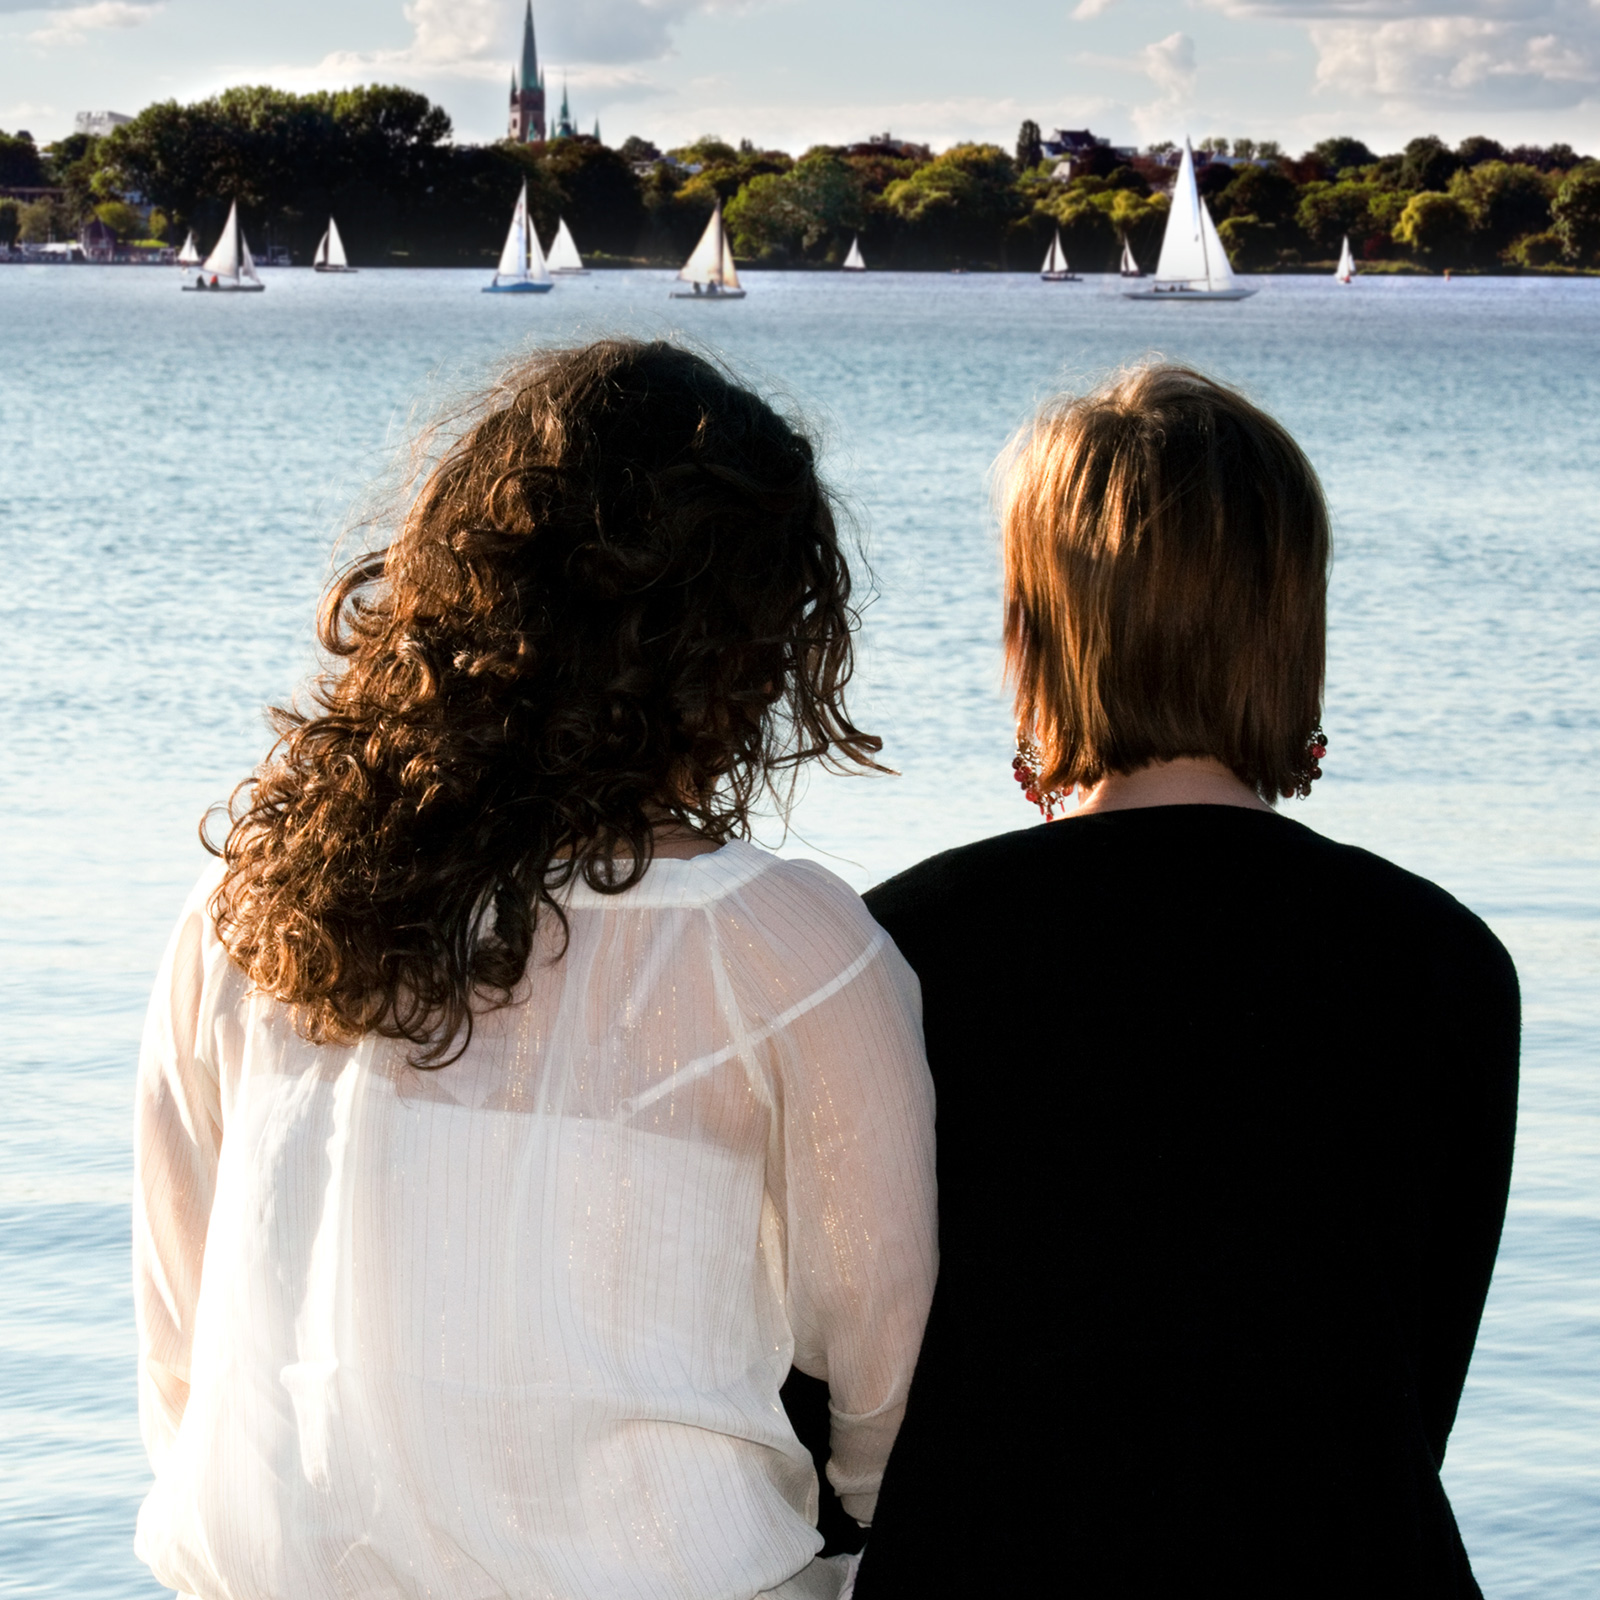 Two people sitting next to each other on pier watching sailboats.